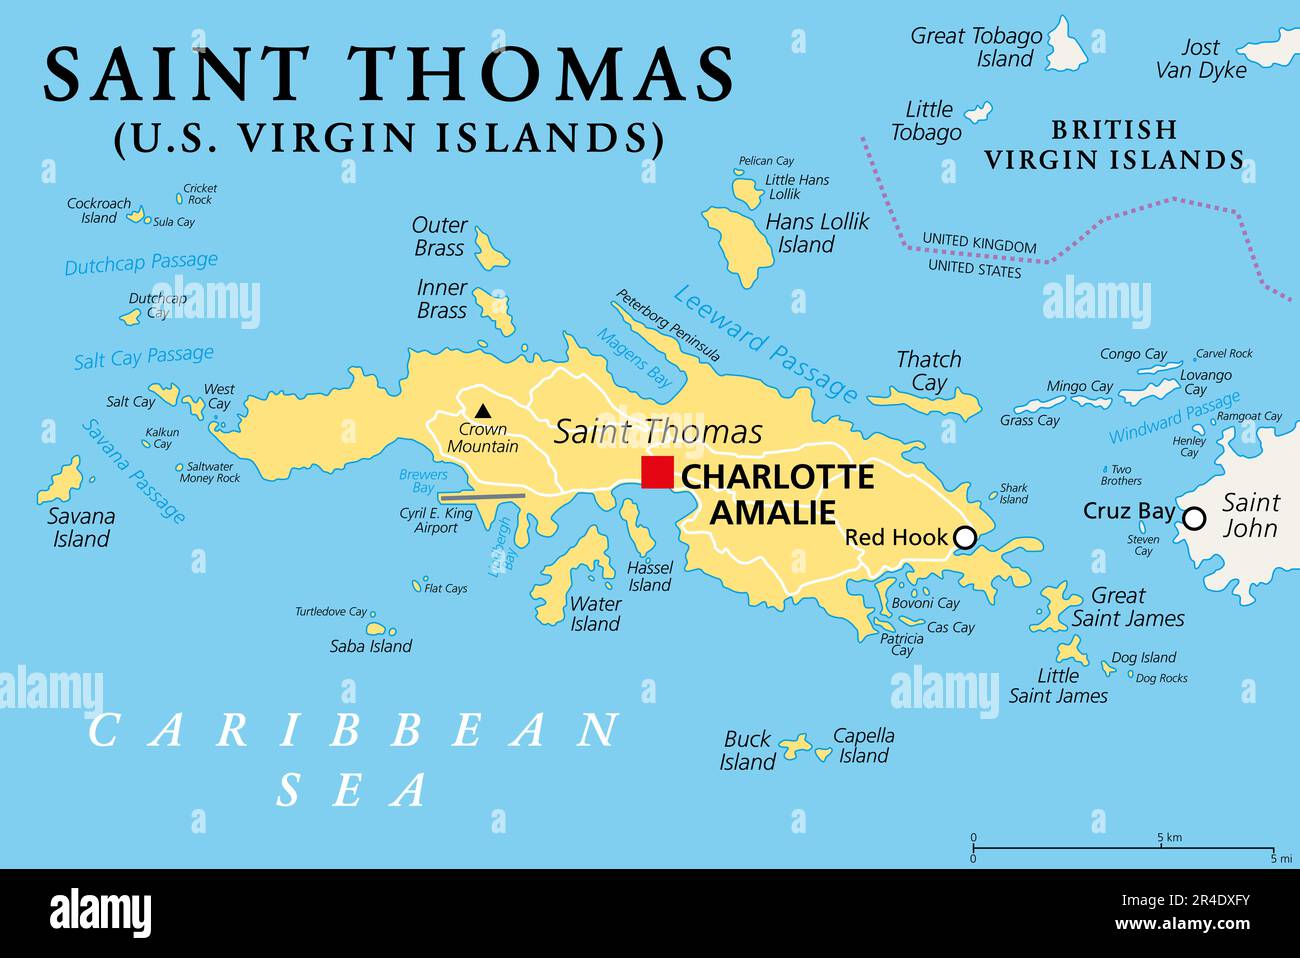 Saint Thomas, United States Virgin Islands, political map. One of the three largest islands of the USVI. With capital Charlotte Amalie. Stock Photo